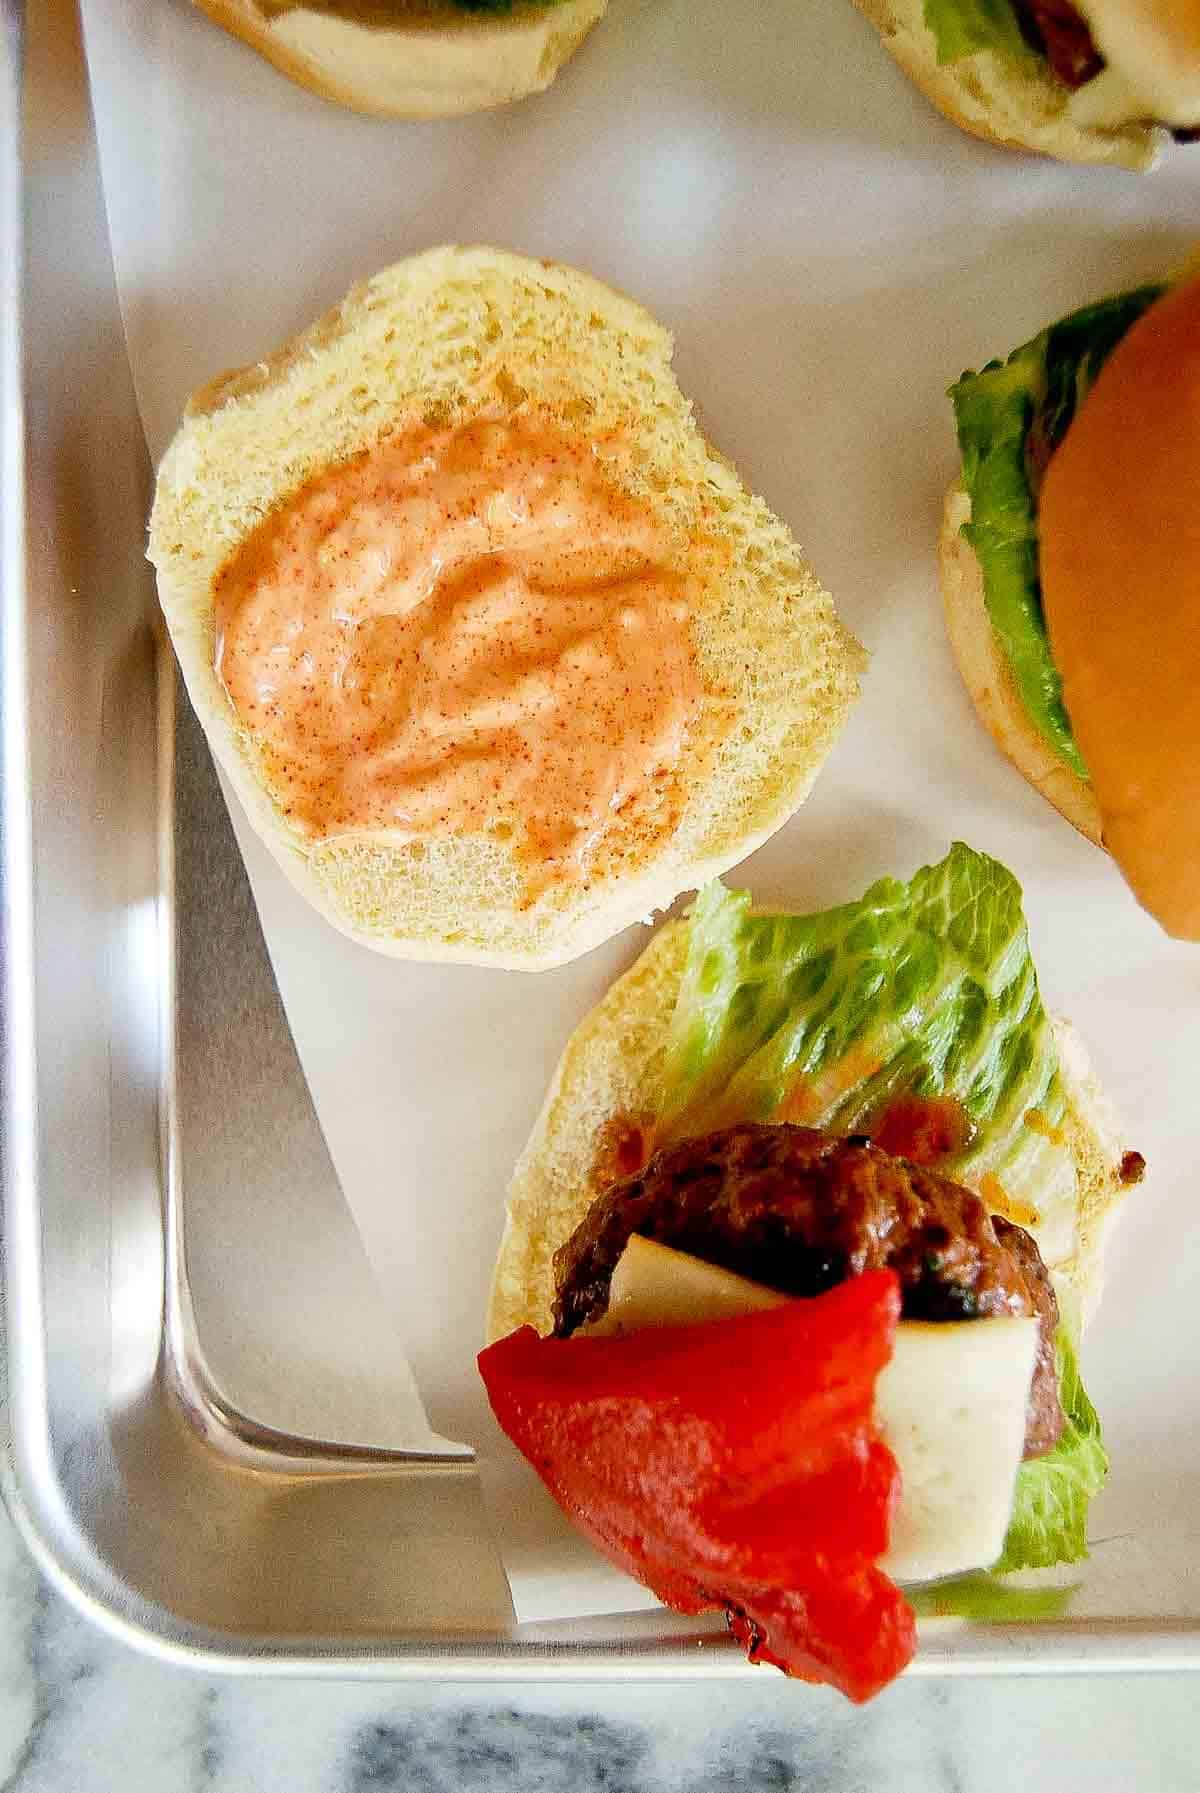 spanish slider on bun with top bun open and red pepper mayo spread across it.